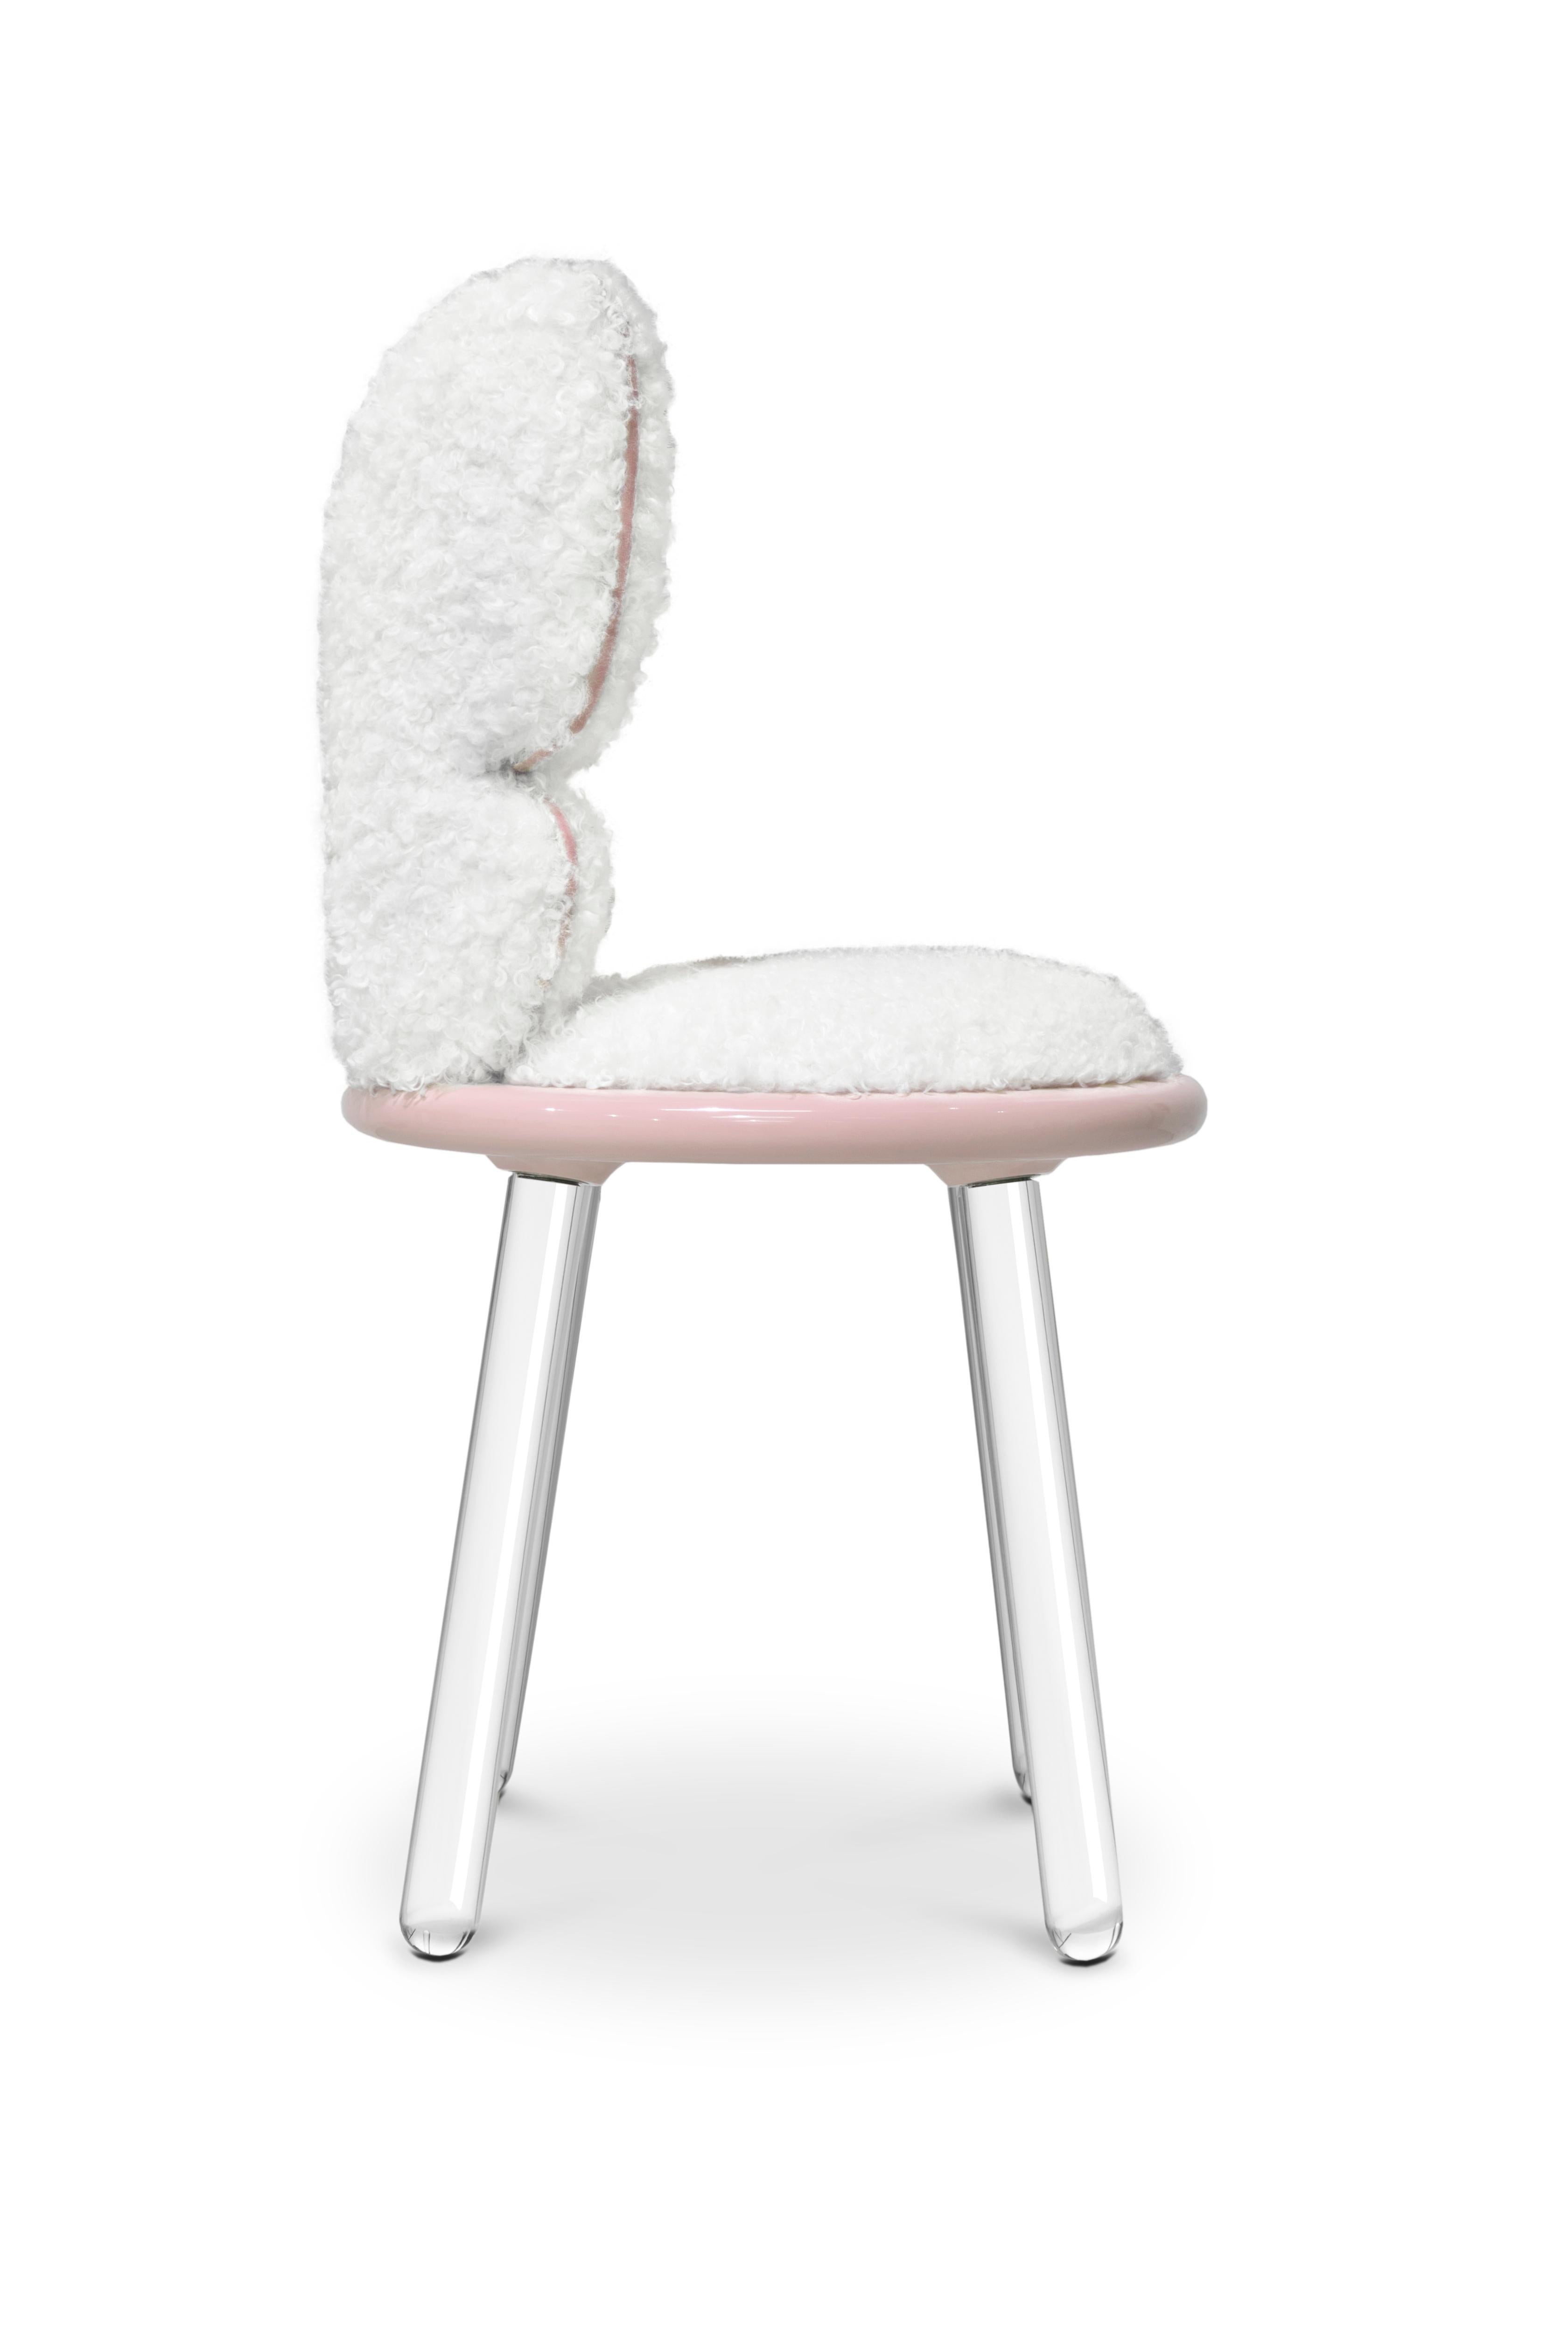 Pixie chair was inspired by the iconic fairy Tinker Bell and is here to add more magic to your kid's room design. The kid's chair is a comfortable seating option for your girl's room design and will give the illusion that she has her own pair of